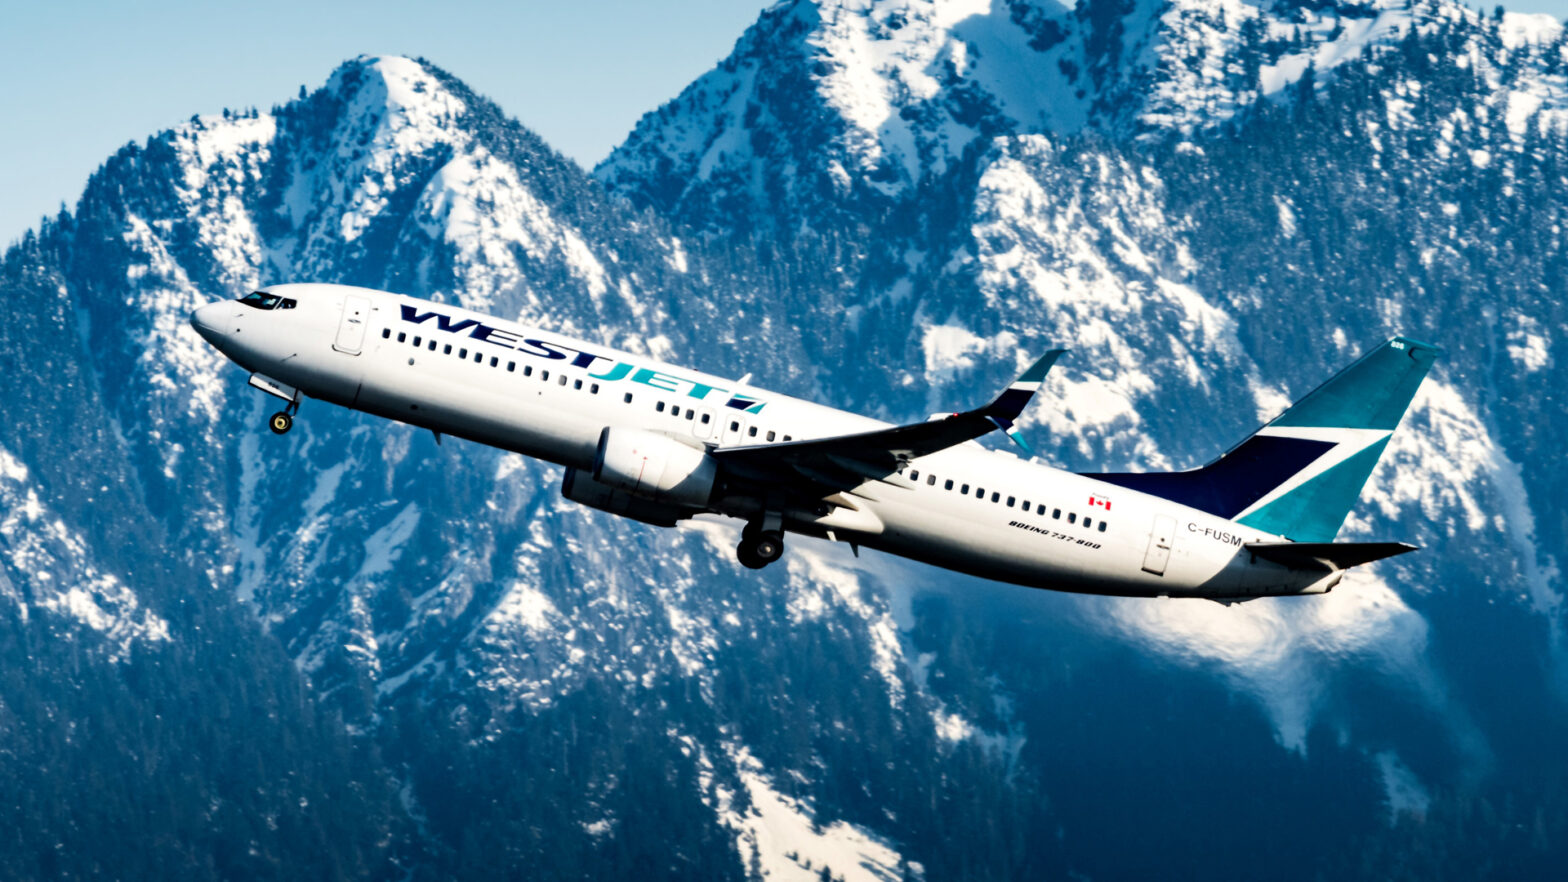 Fly to Festivals via the Canadian WestJet Airlines